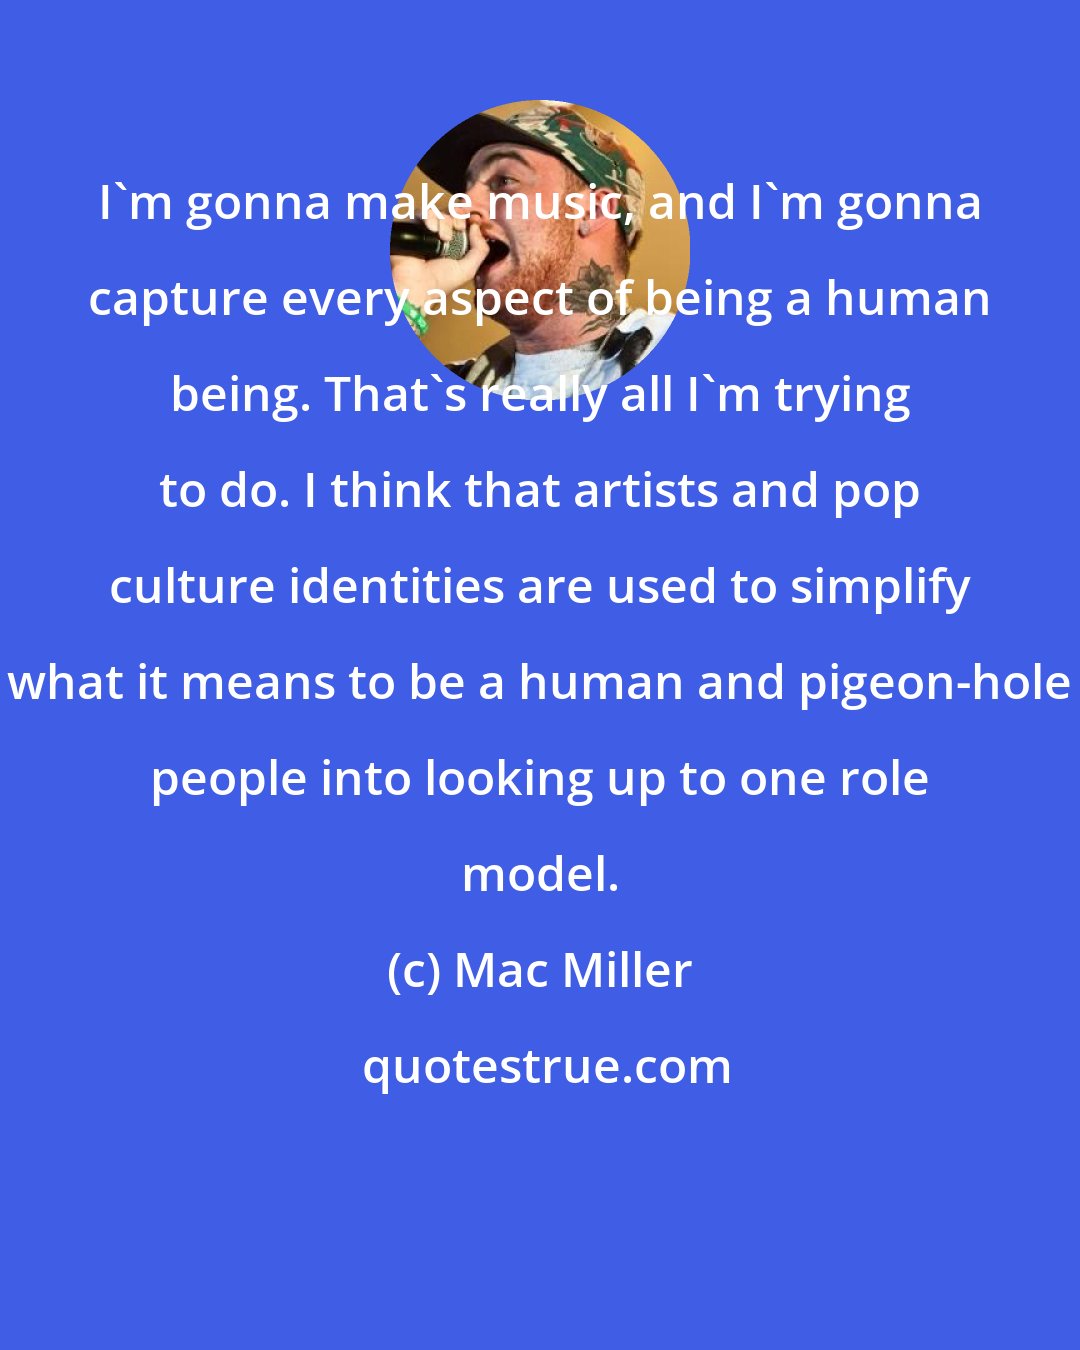 Mac Miller: I'm gonna make music, and I'm gonna capture every aspect of being a human being. That's really all I'm trying to do. I think that artists and pop culture identities are used to simplify what it means to be a human and pigeon-hole people into looking up to one role model.